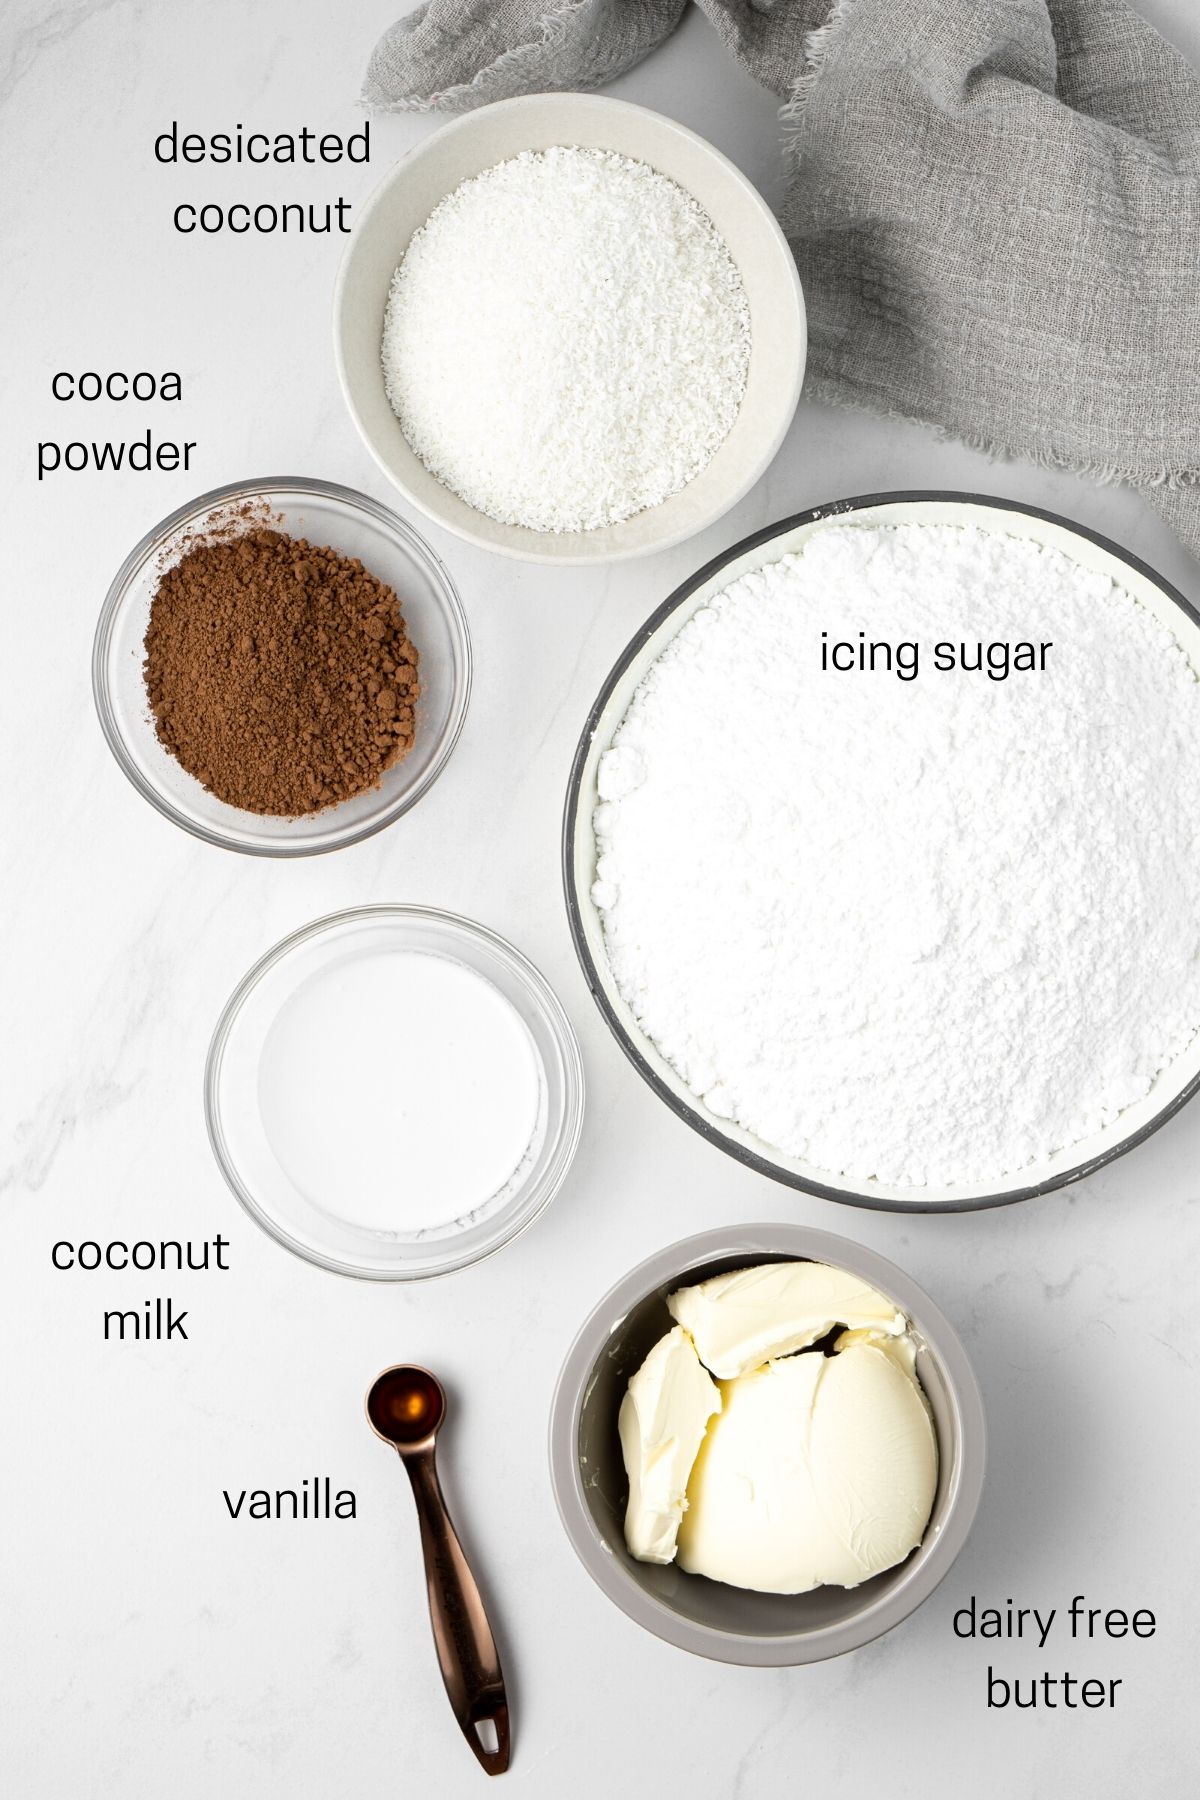 Ingredients for buttercream and chocolate icing laid out in small bowls.